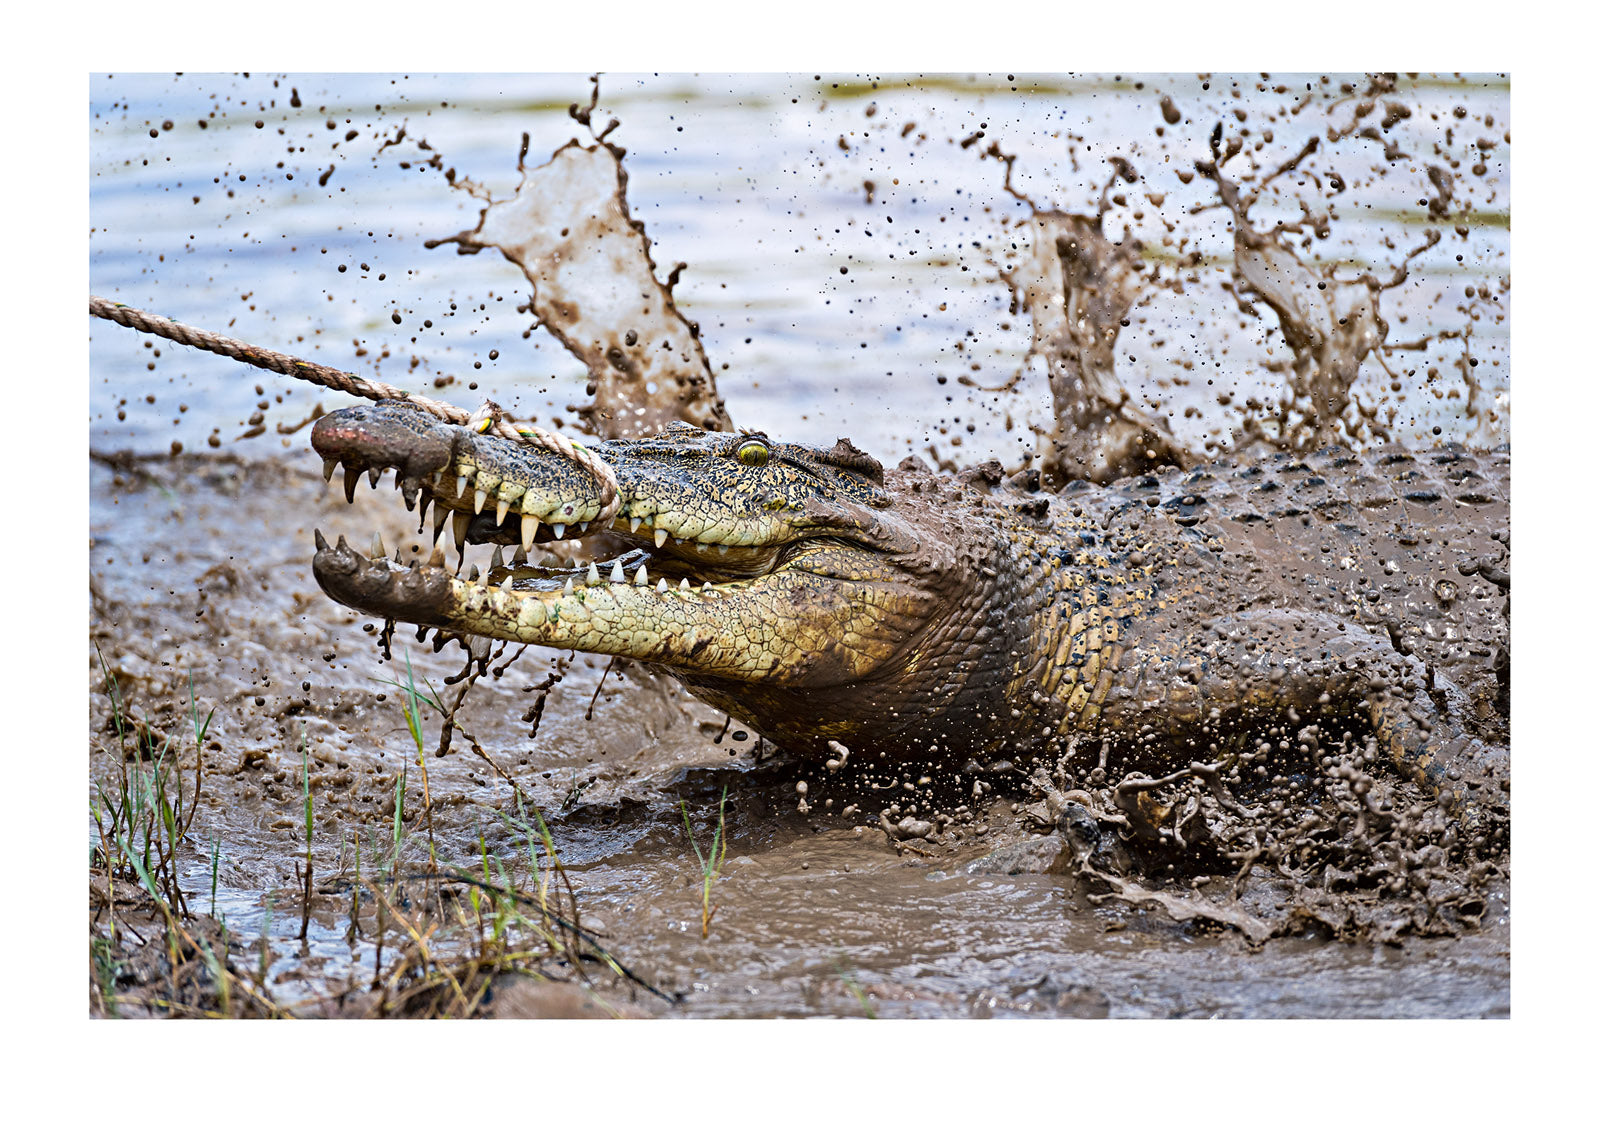 A Saltwater Crocodile being trapped for relocated away from tourists.  Northern Territory, Australia.